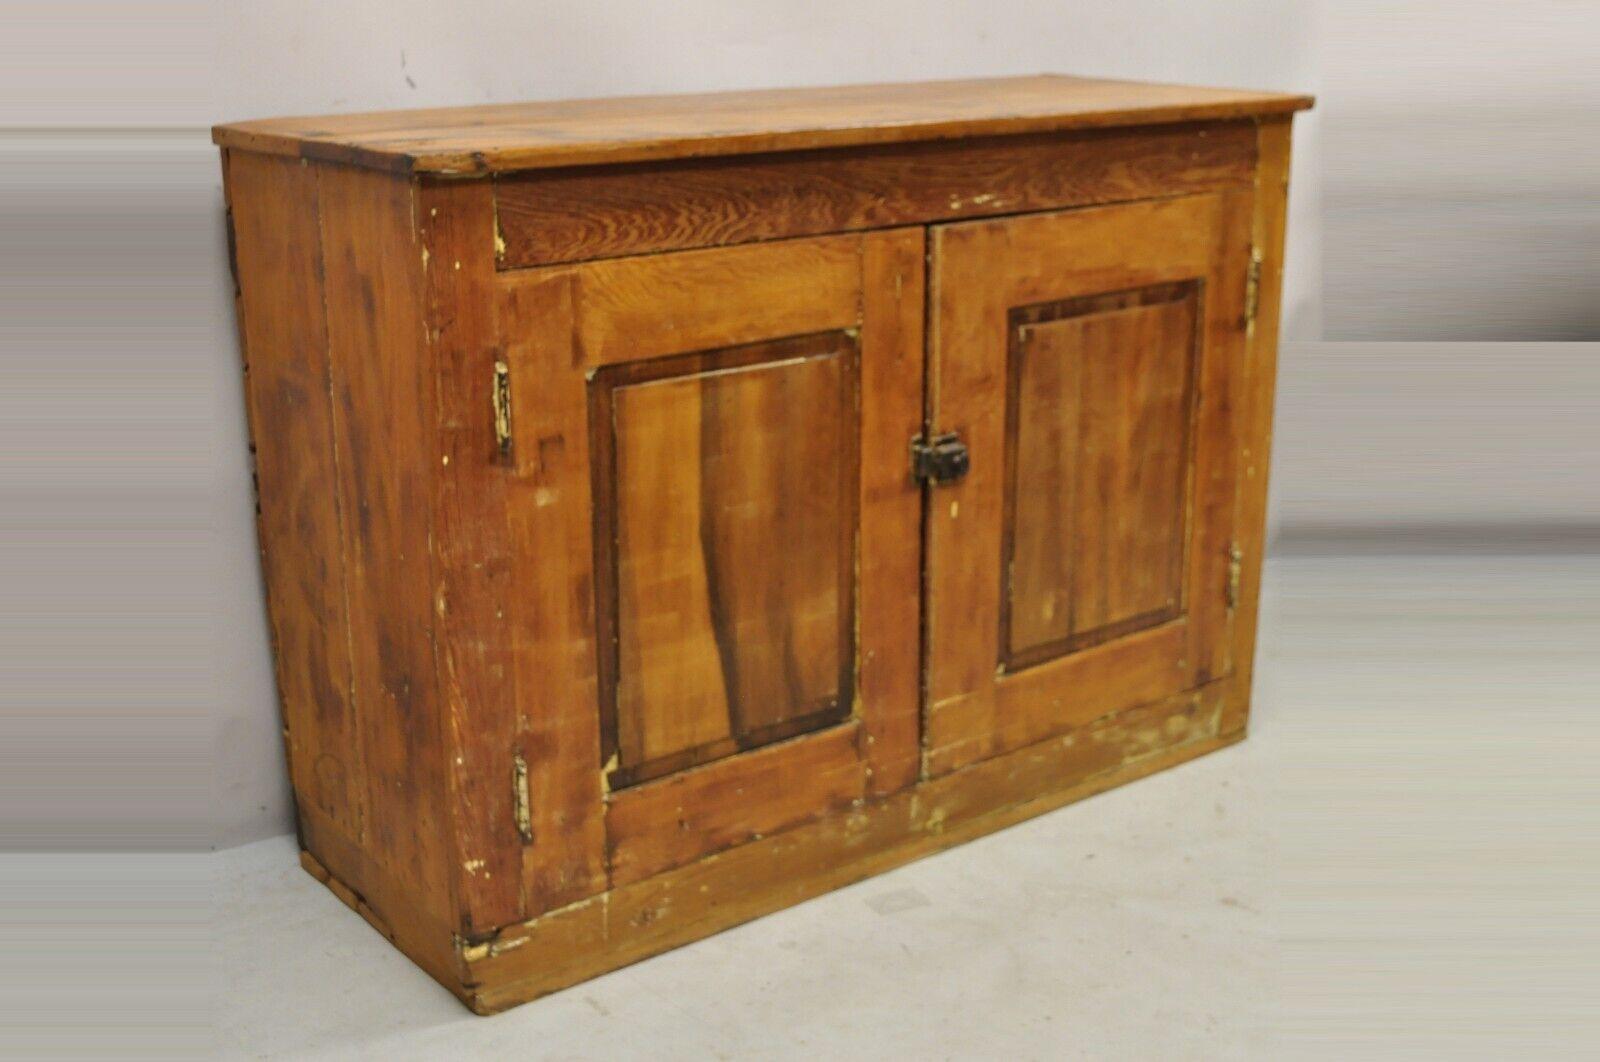 Antique American Primitive Country pine wood 2 Door cupboard Hutch Cabinet. Item features plank wood backing, solid wood construction, beautiful wood grain, distressed finish, 2 swing doors, 1 wooden shelf, very nice antique item, quality American